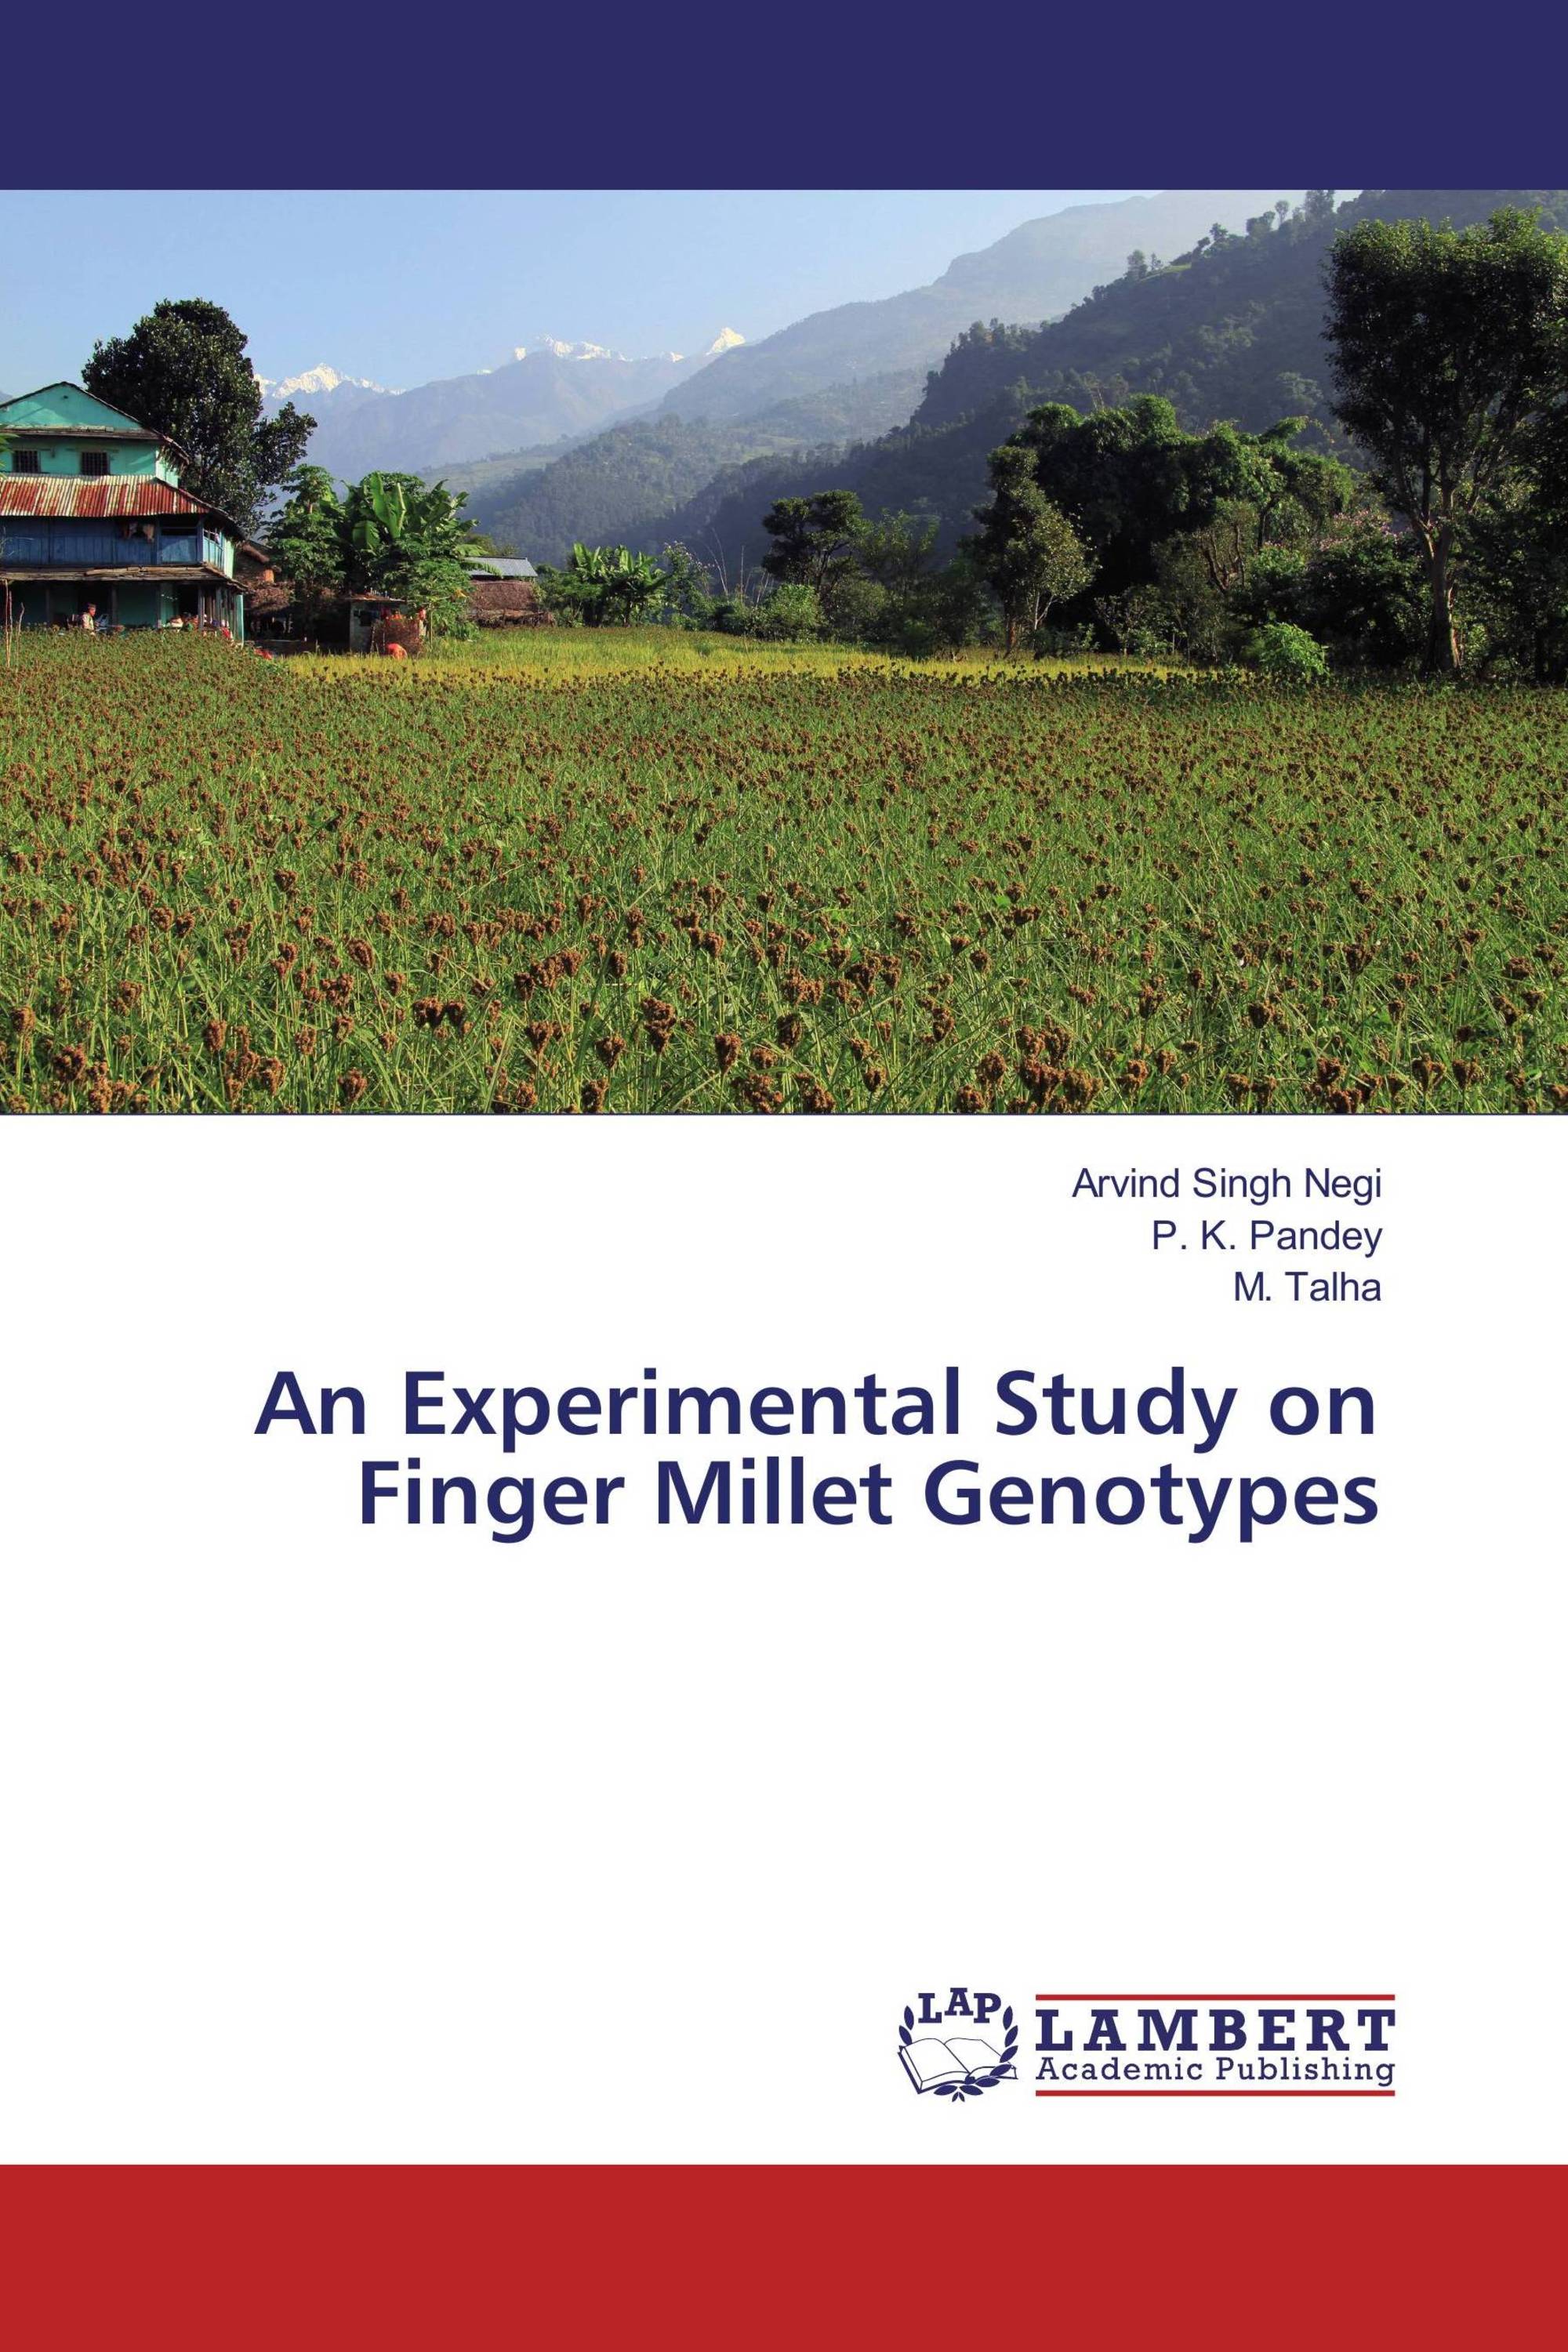 An Experimental Study on Finger Millet Genotypes